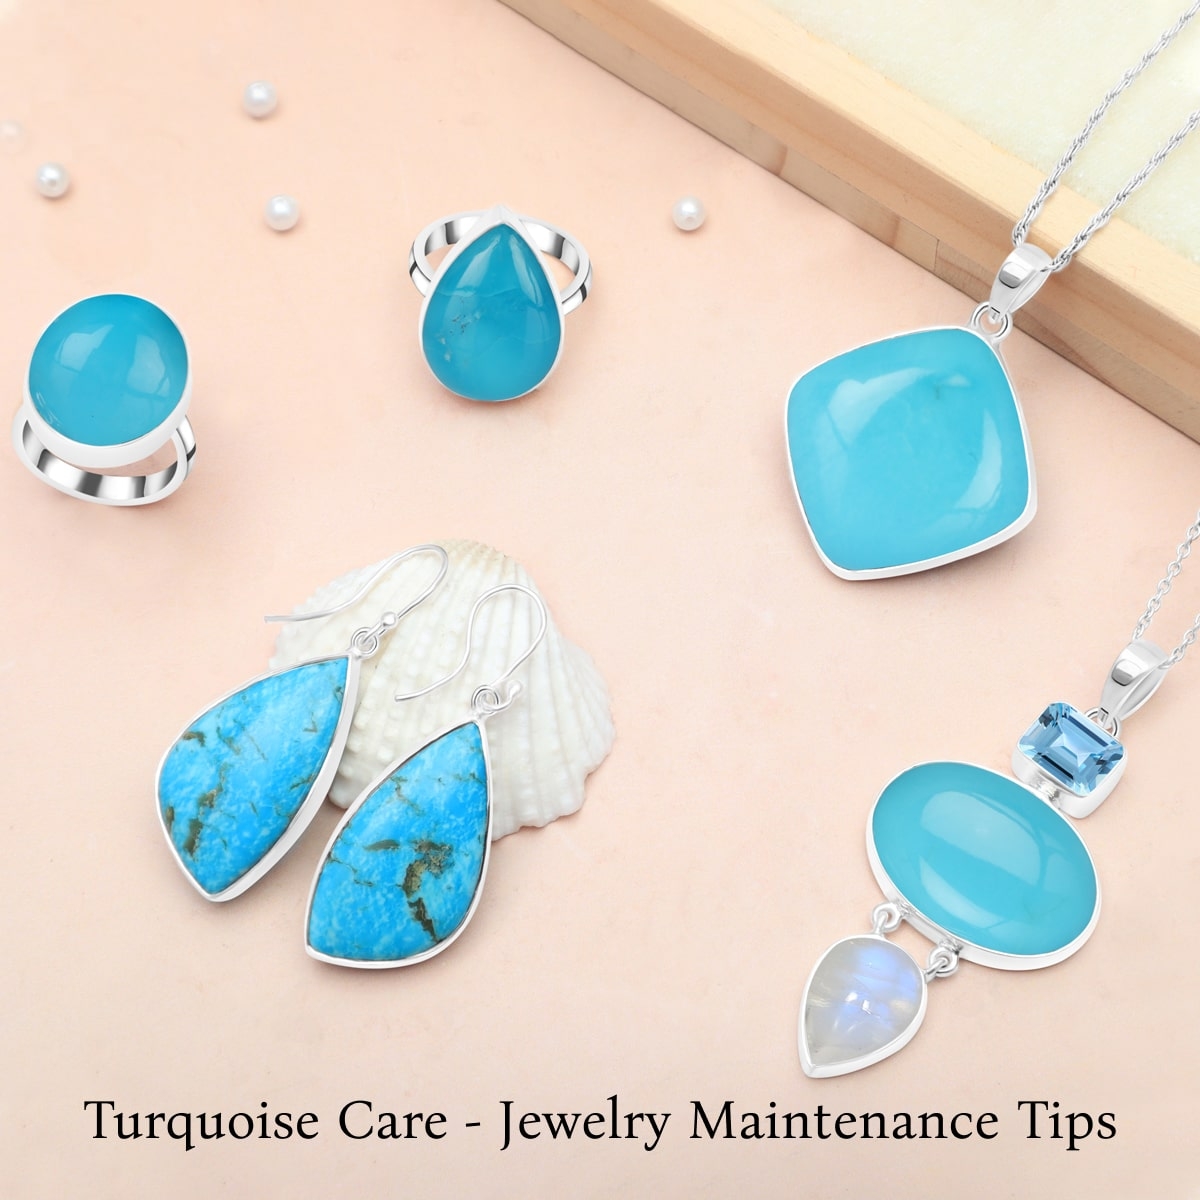 Tips for Turquoise Jewelry Care